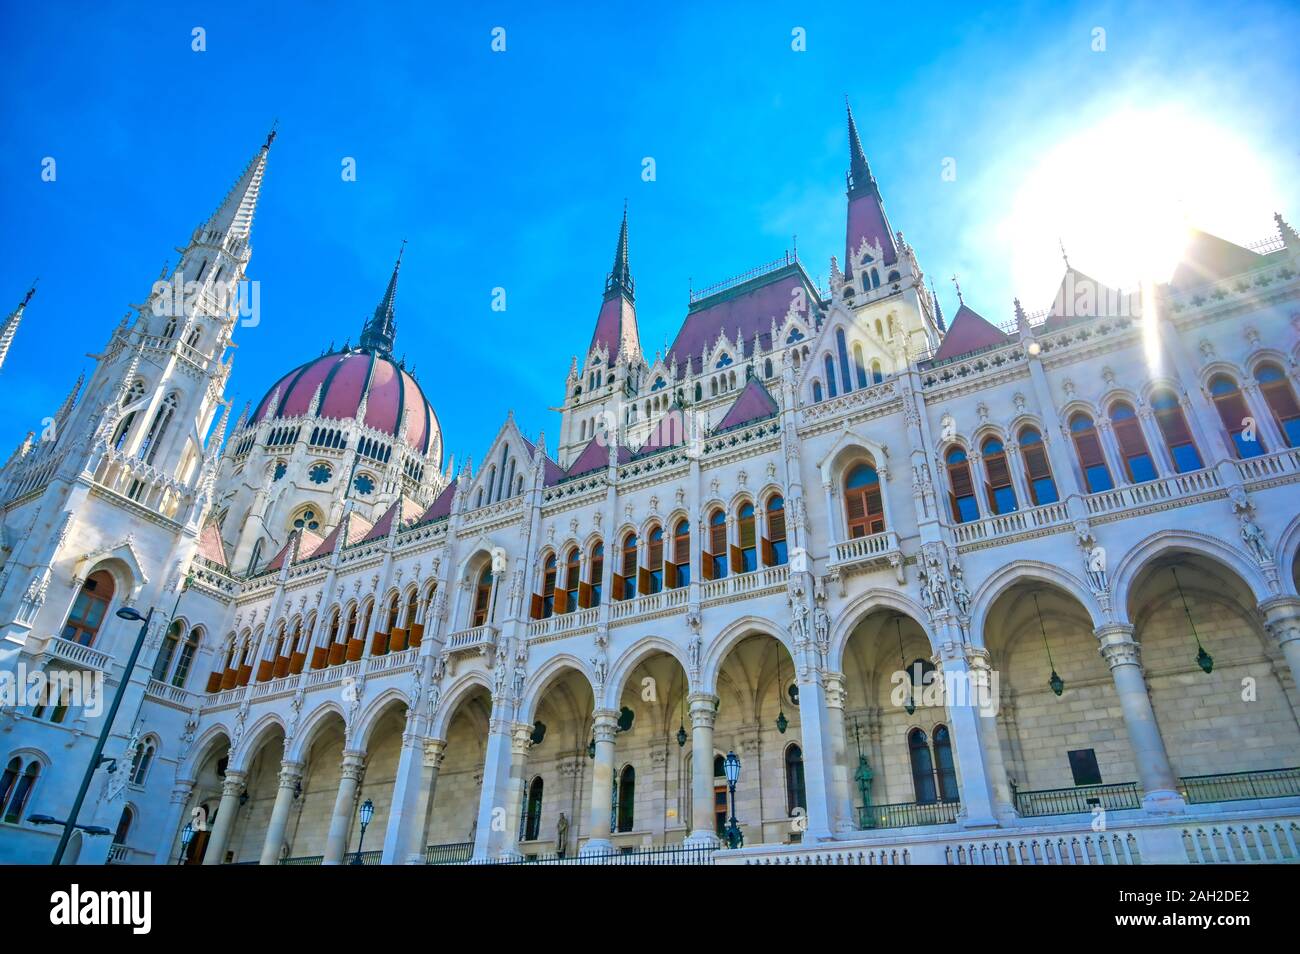 The exterior of the Hungarian Parliament Building in Budapest, Hungary. Stock Photo